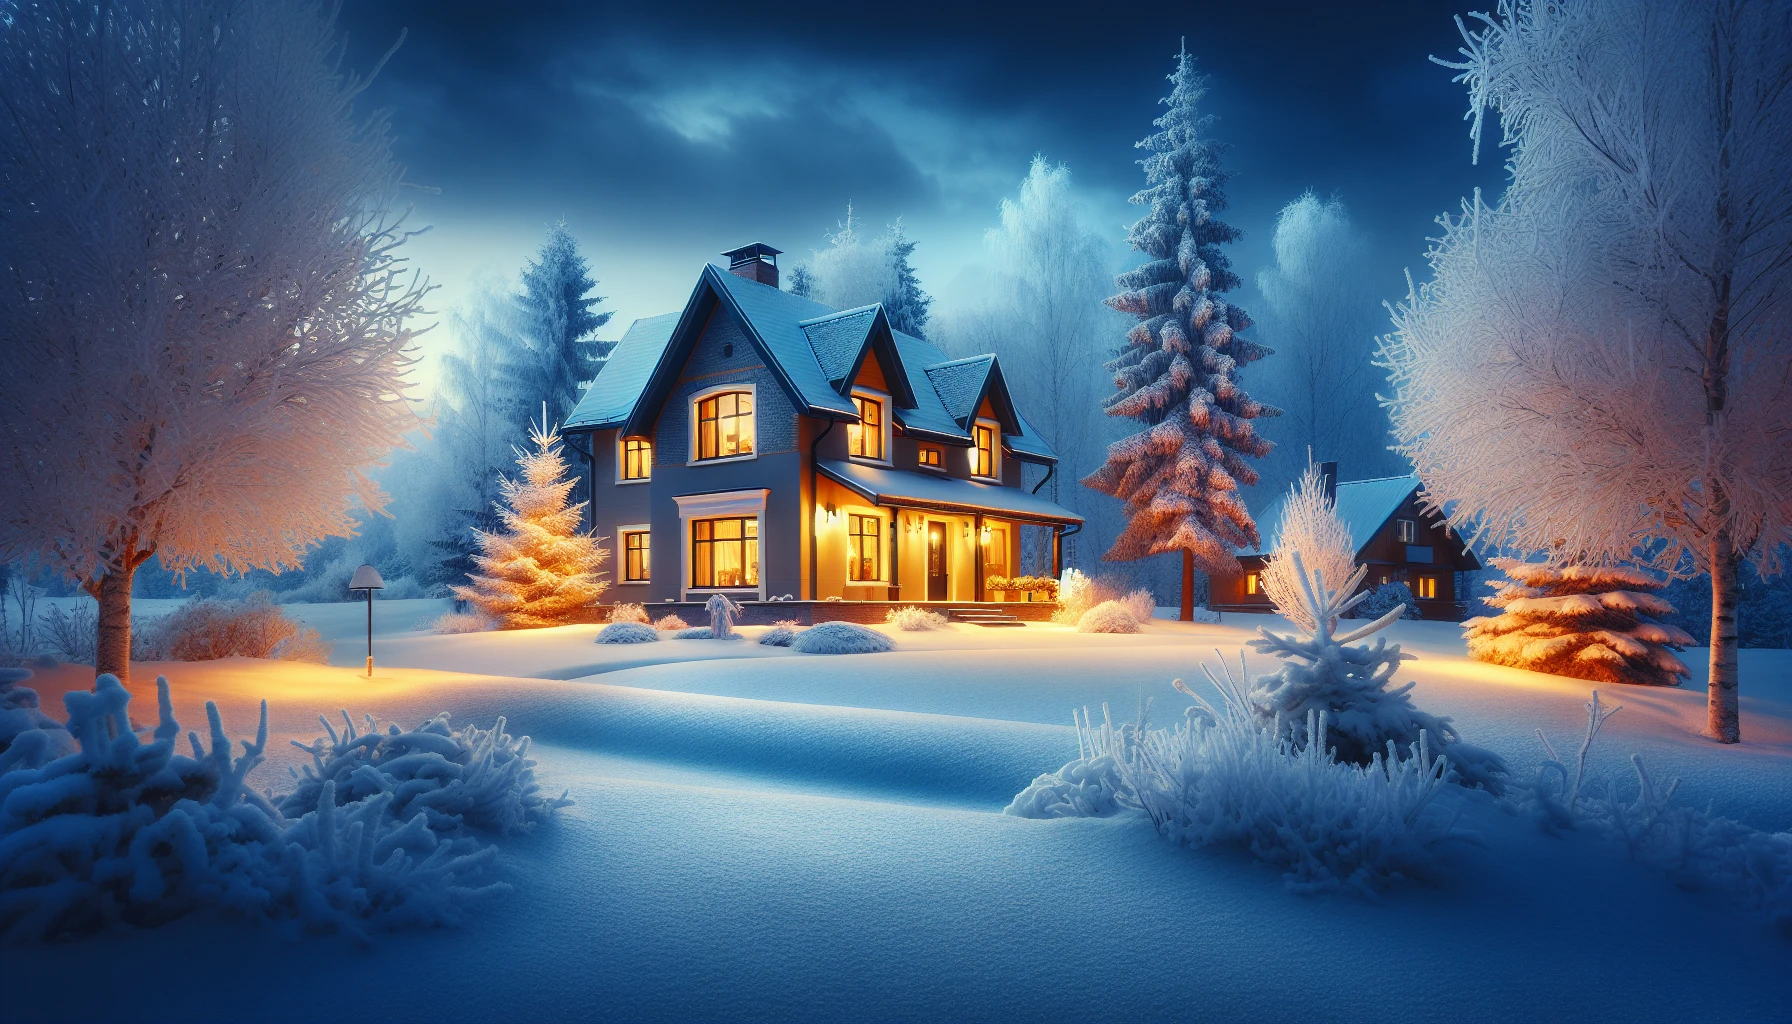 Festive winter scene for home buyers and sellers